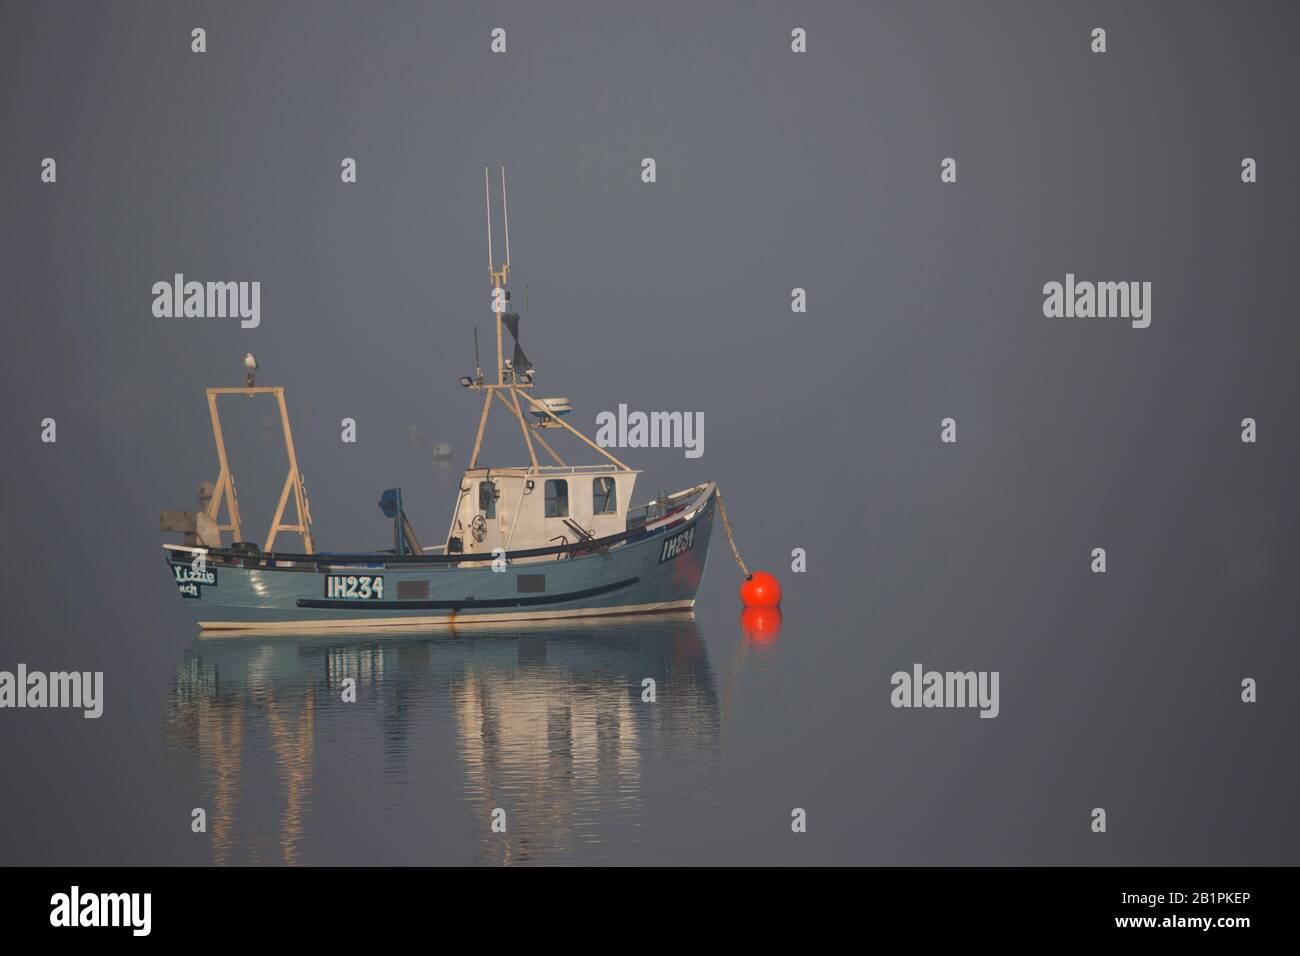 A fishing boat moored in thick fog Stock Photo